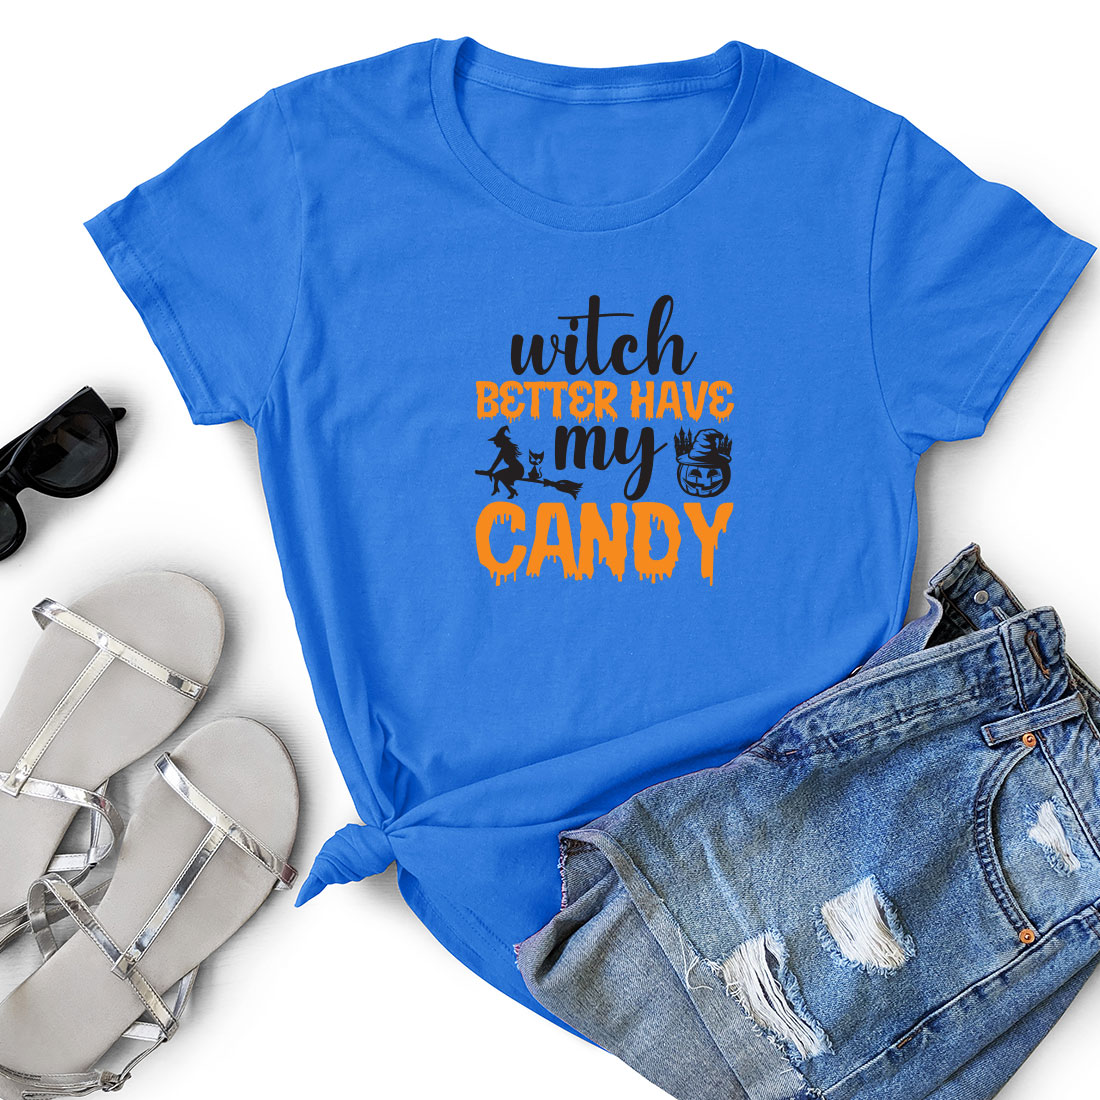 T - shirt that says witch better have my candy.